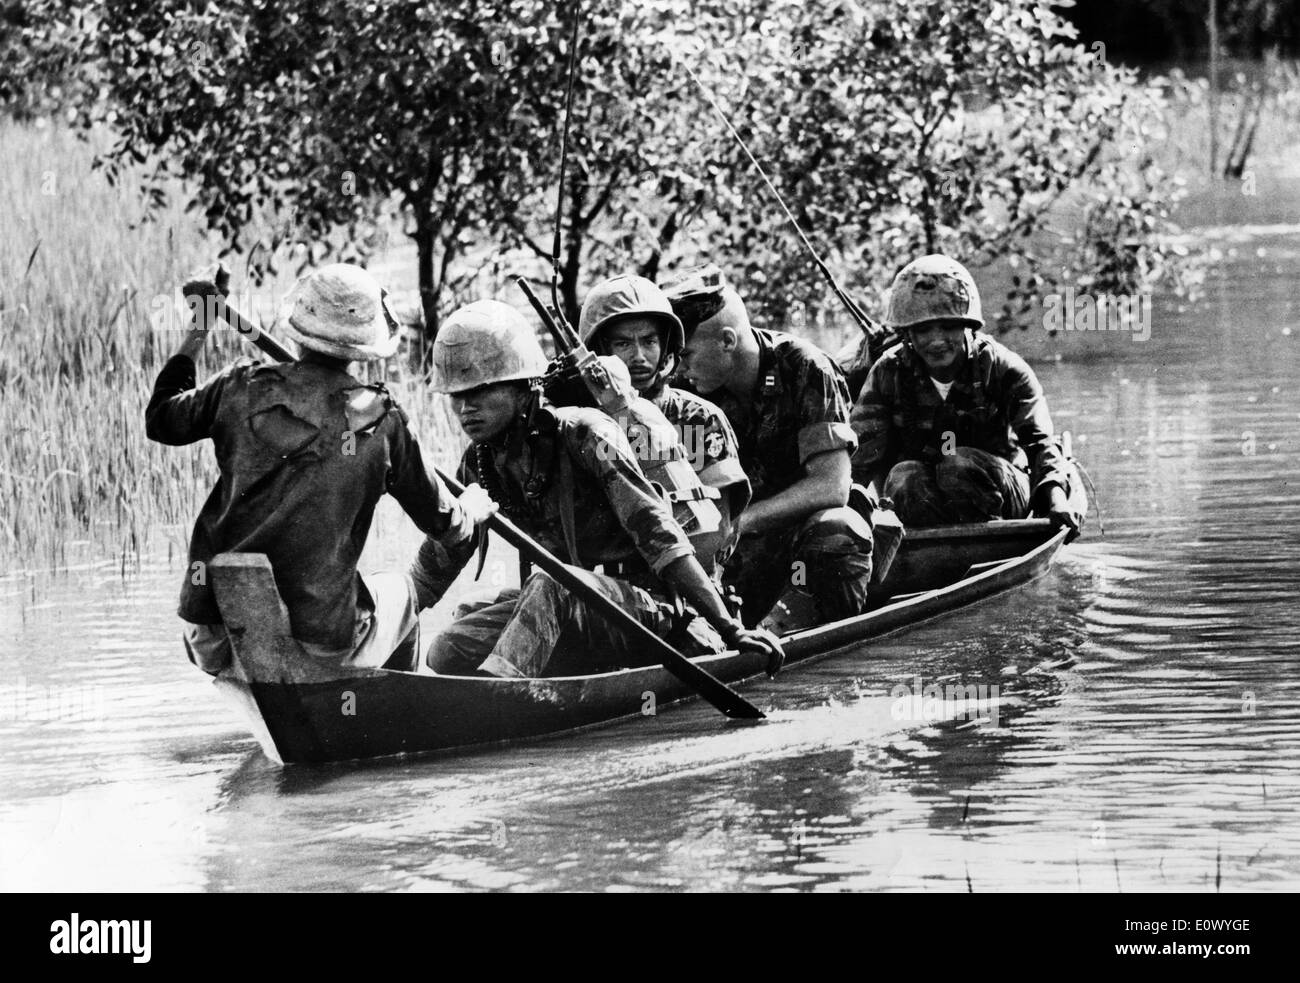 Soldiers search for Viet Cong Guerillas Stock Photo